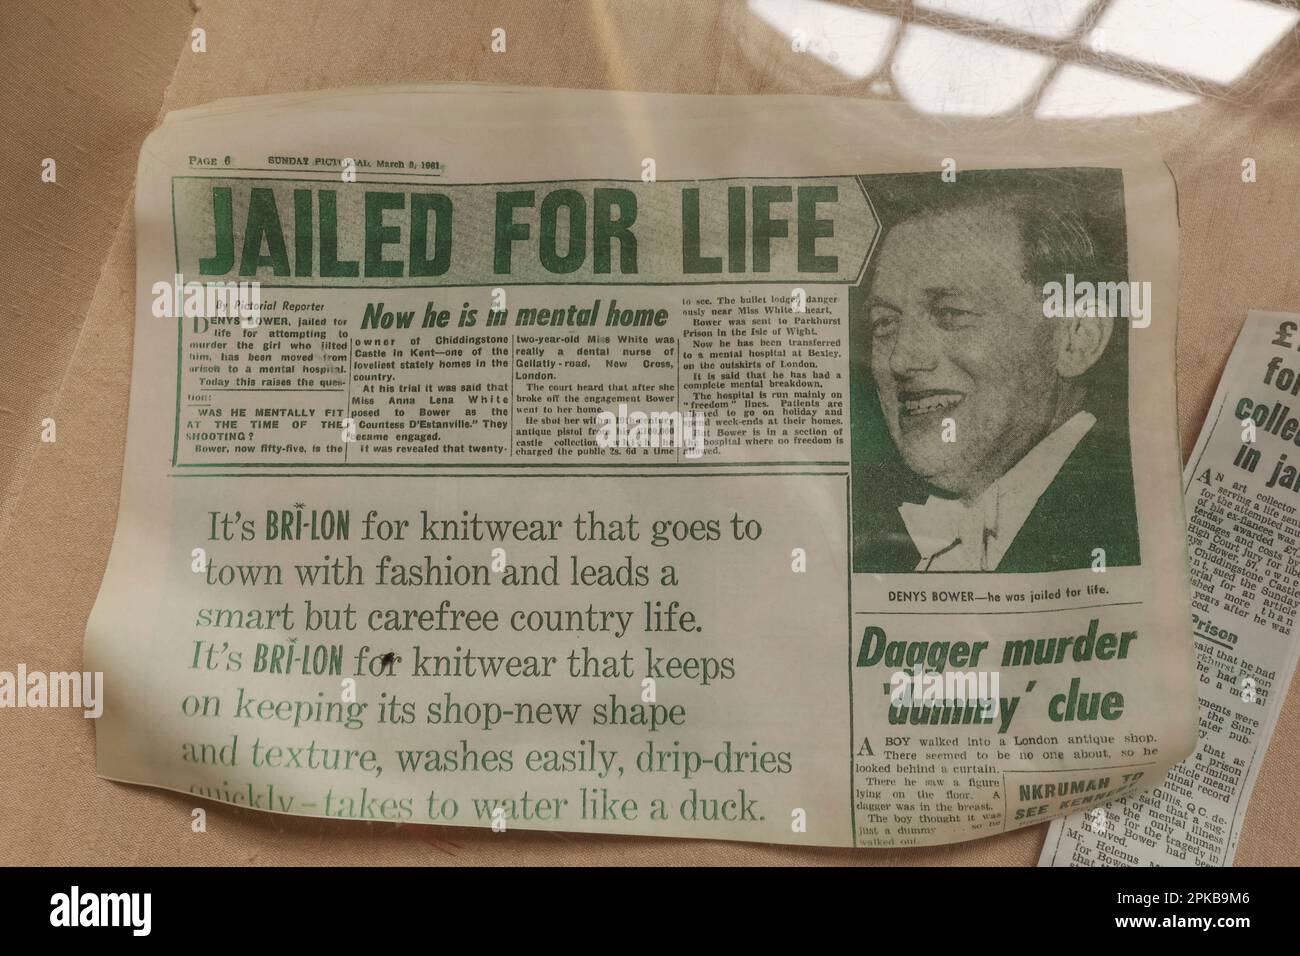 England, Kent, Edenbridge, Chiddingstone, Chiddingstone Castle, Page from The Sunday Pictorial Newspaper dated March 8 1961 Reporting on the Jailing for Life of Denys Bower Stock Photo